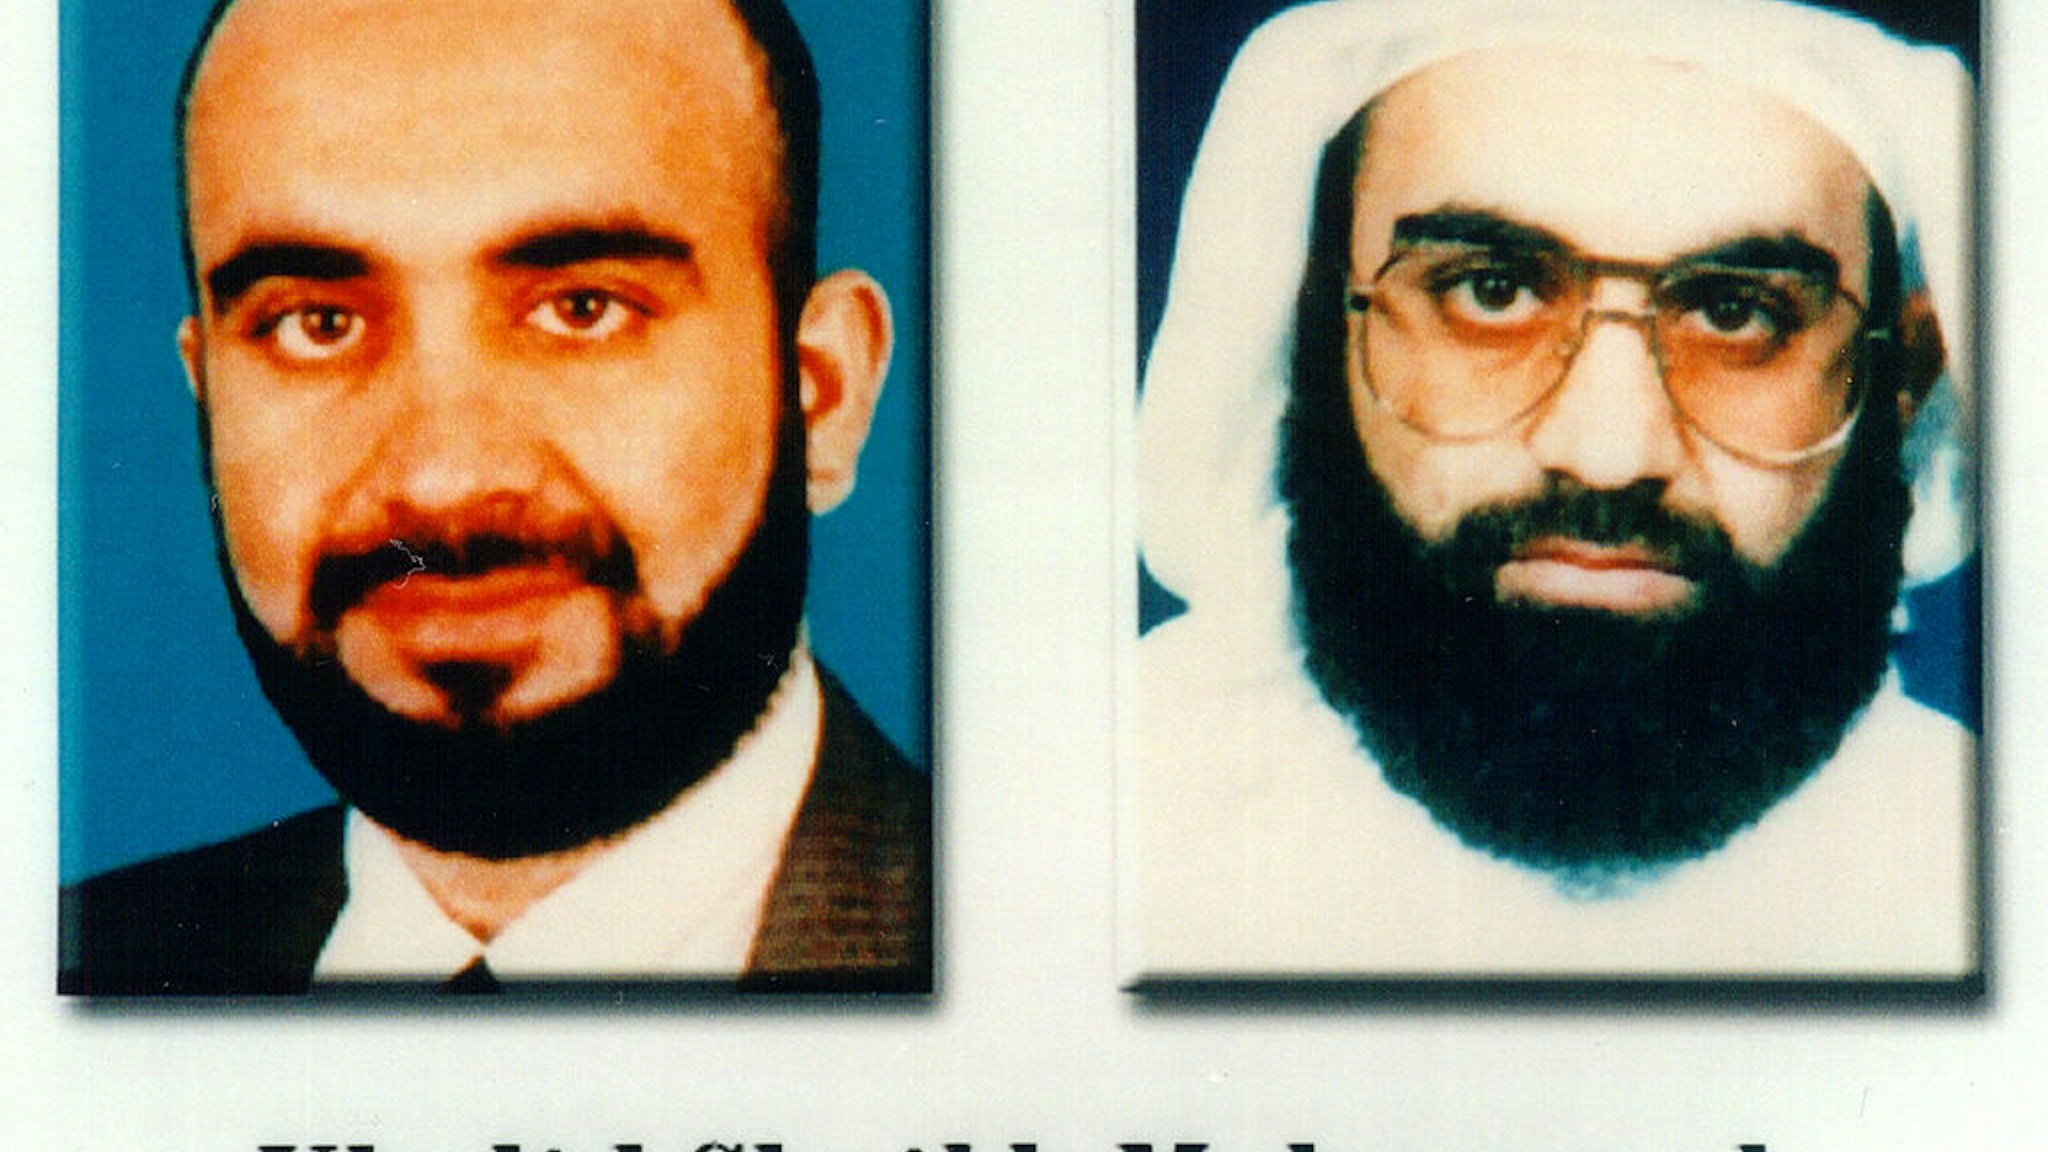 UNDATED: (FILE PHOTO) Khalid Shaikh Mohammed, a suspected al Qaeda terrorist, is shown in this photo released by the FBI October 10, 2001 in Washington, D.C. Mohammed was arrested at a house in Rawalpindi, Pakistan. It was reported October 21, 2003 that U.S. officials believe Mohammed killed Wall Street Journal reporter Daniel Pearl in Pakistan. (Photo Courtesy of FBI/Getty Images)